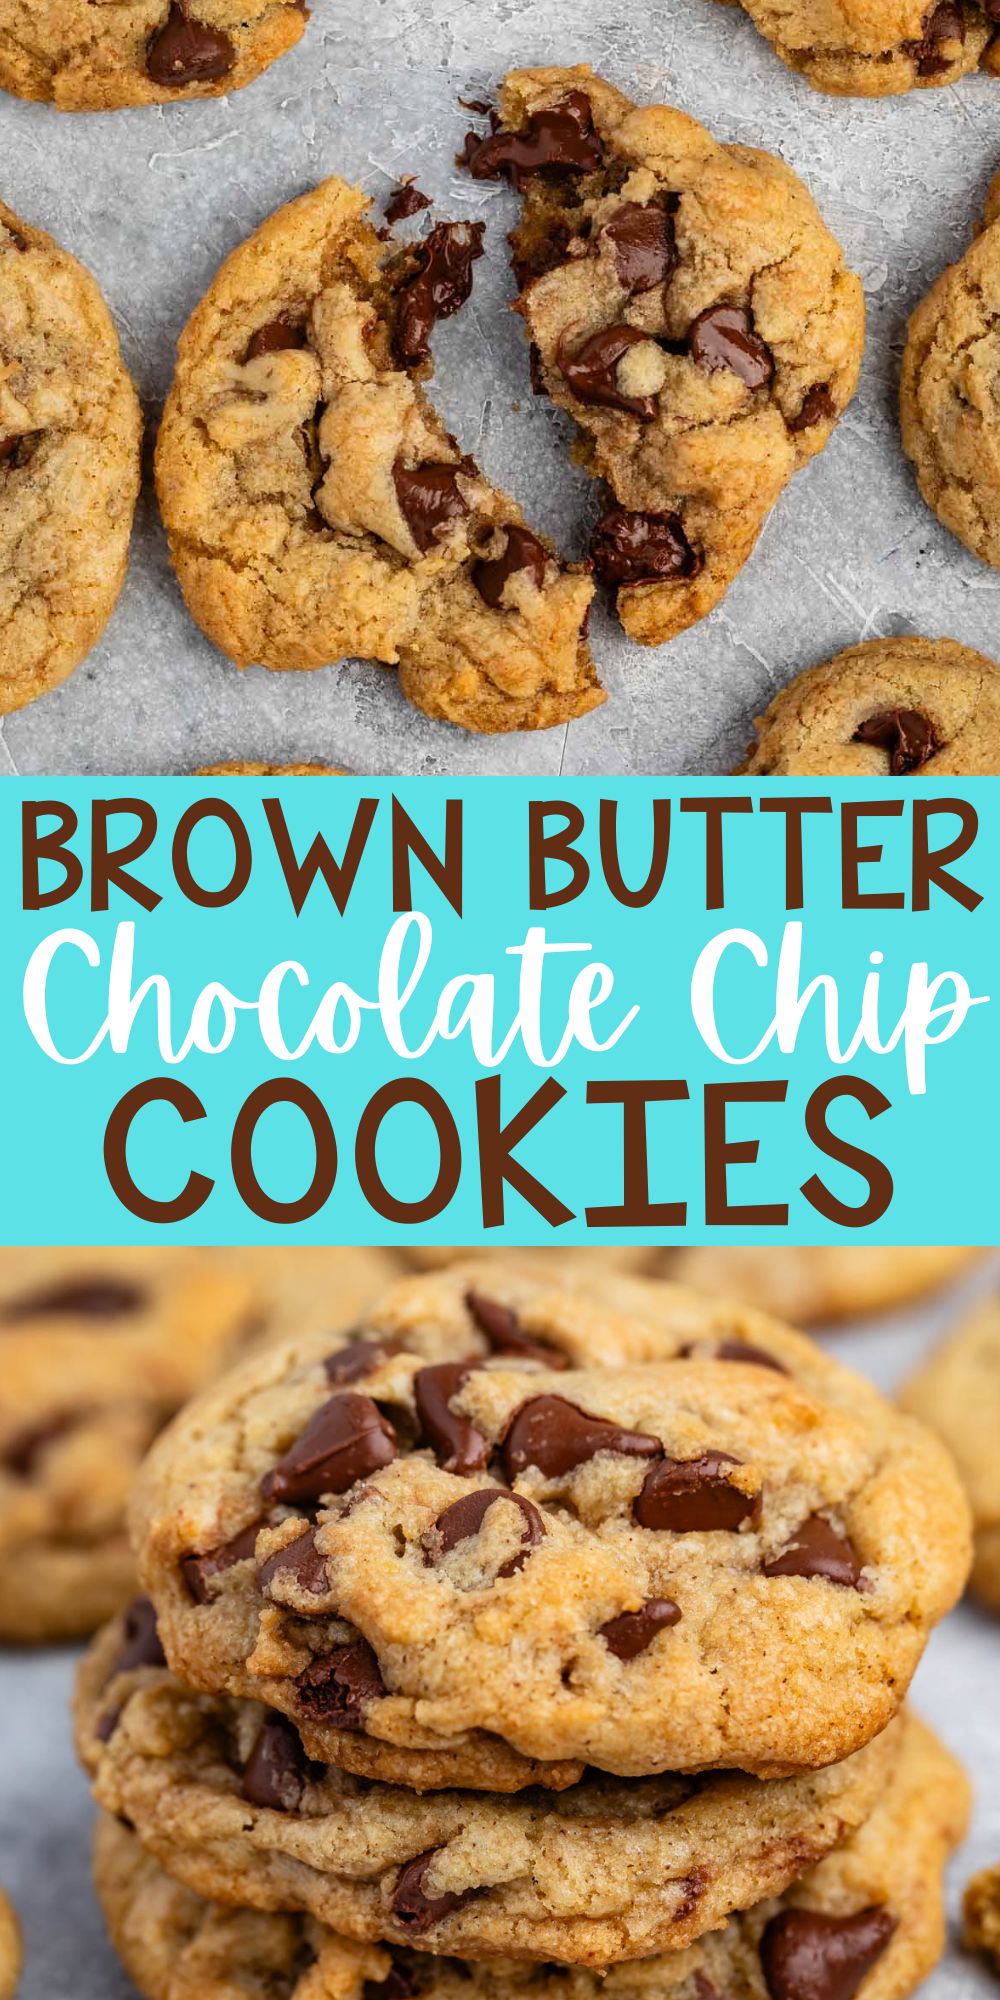 two photos of chocolate chip cookies with chocolate chips baked into the center with words on the image.